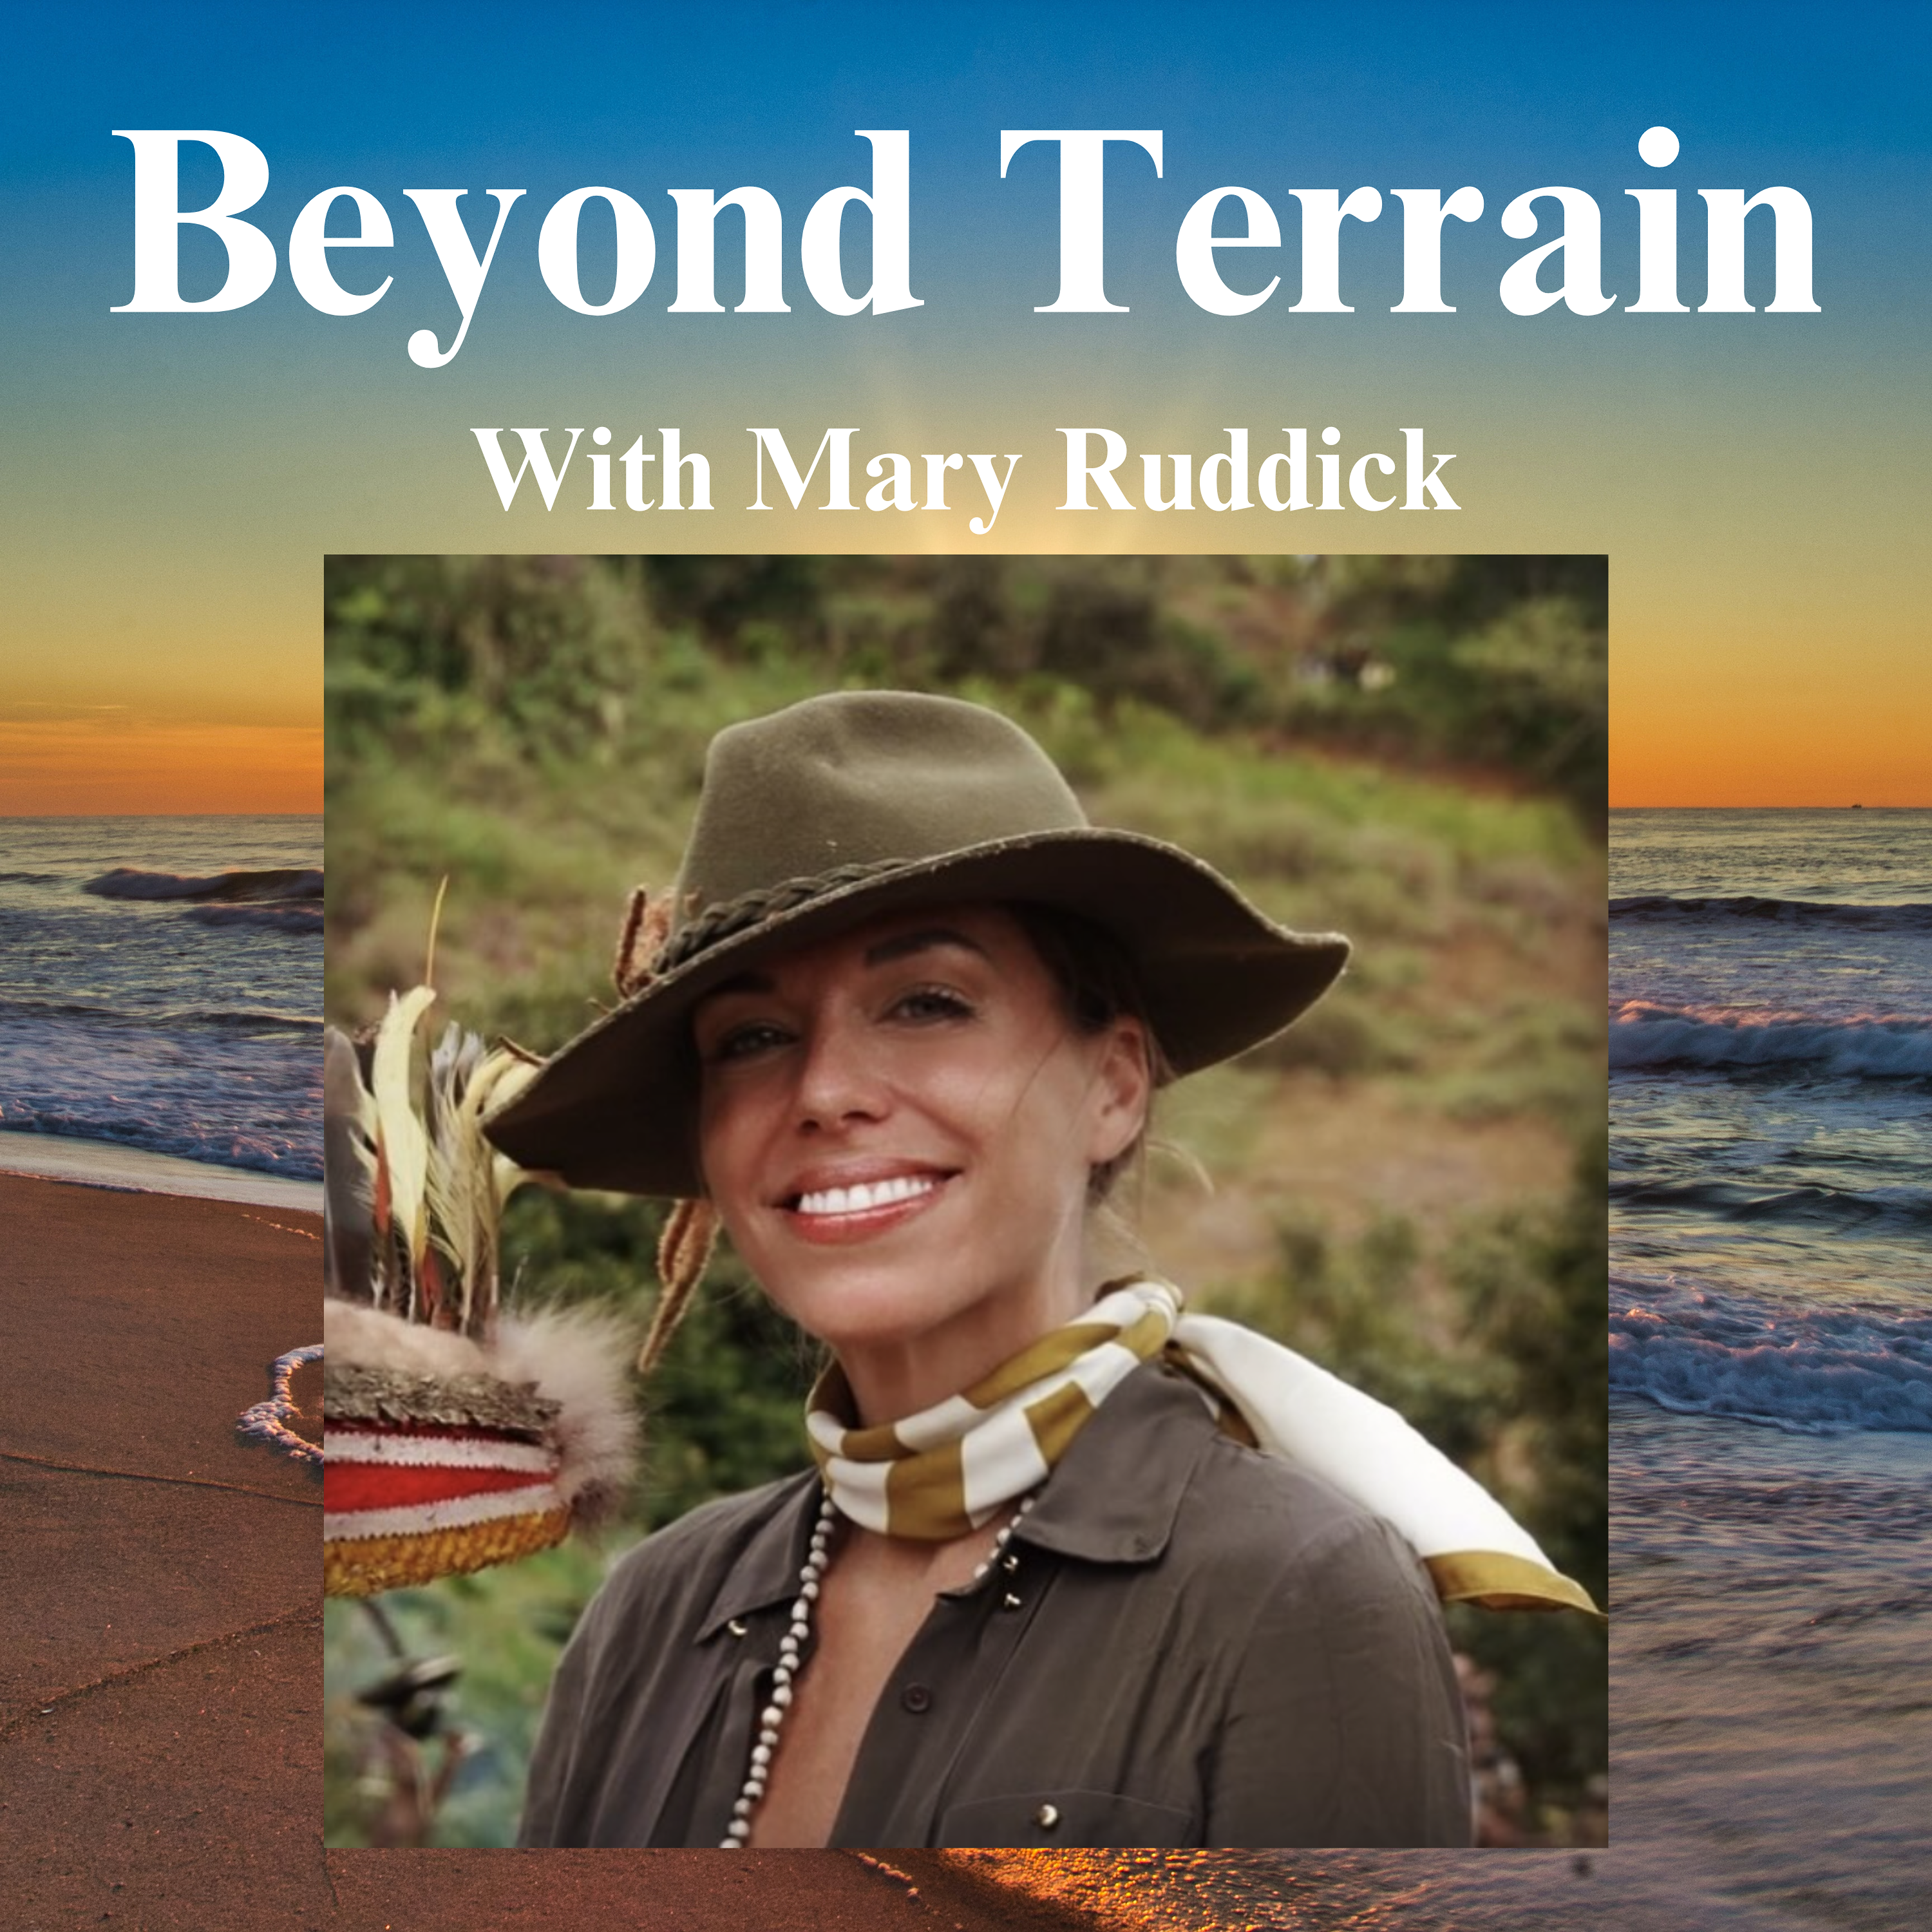 Mary Ruddick on Learning from Traditional Cultures, the Psyche, Curiosity, Goals, and So much More!